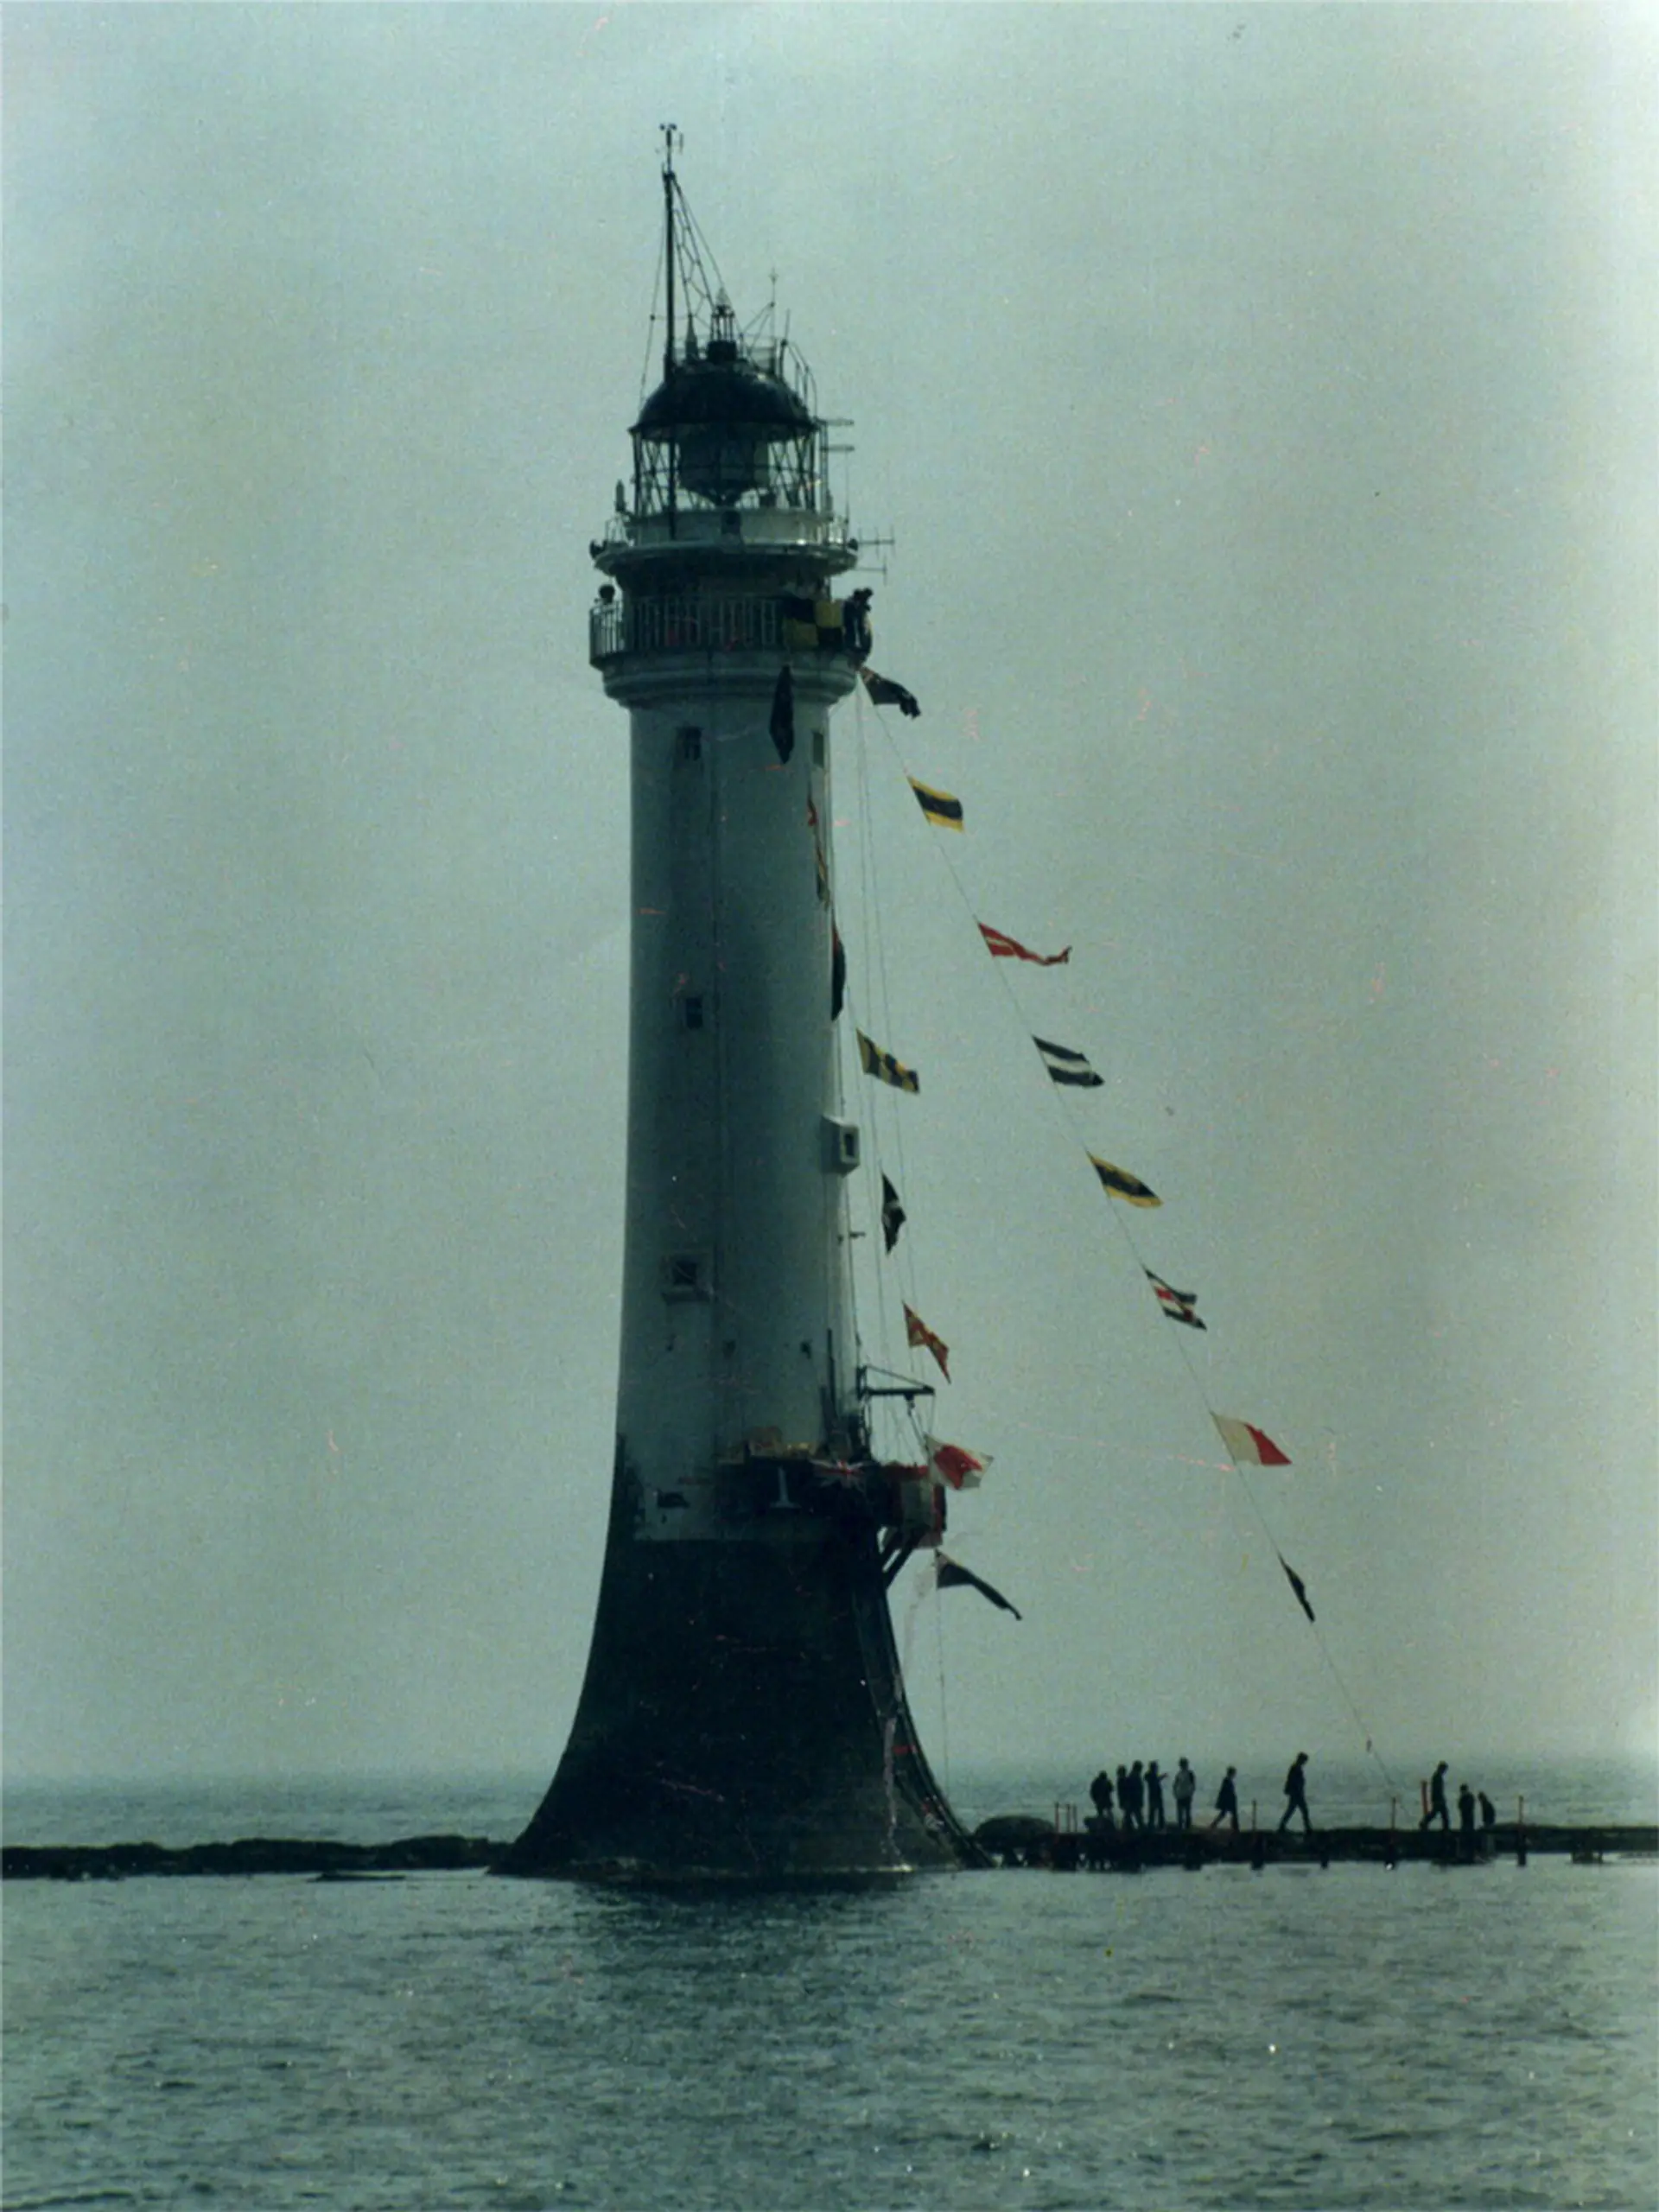 An image of The Bellrock Lighthouse in Arbroath. The lighthouse is centred in the picture and has flags attached from the top to the ground. There are people in the bottom right hand corner of the image, they look tiny. 